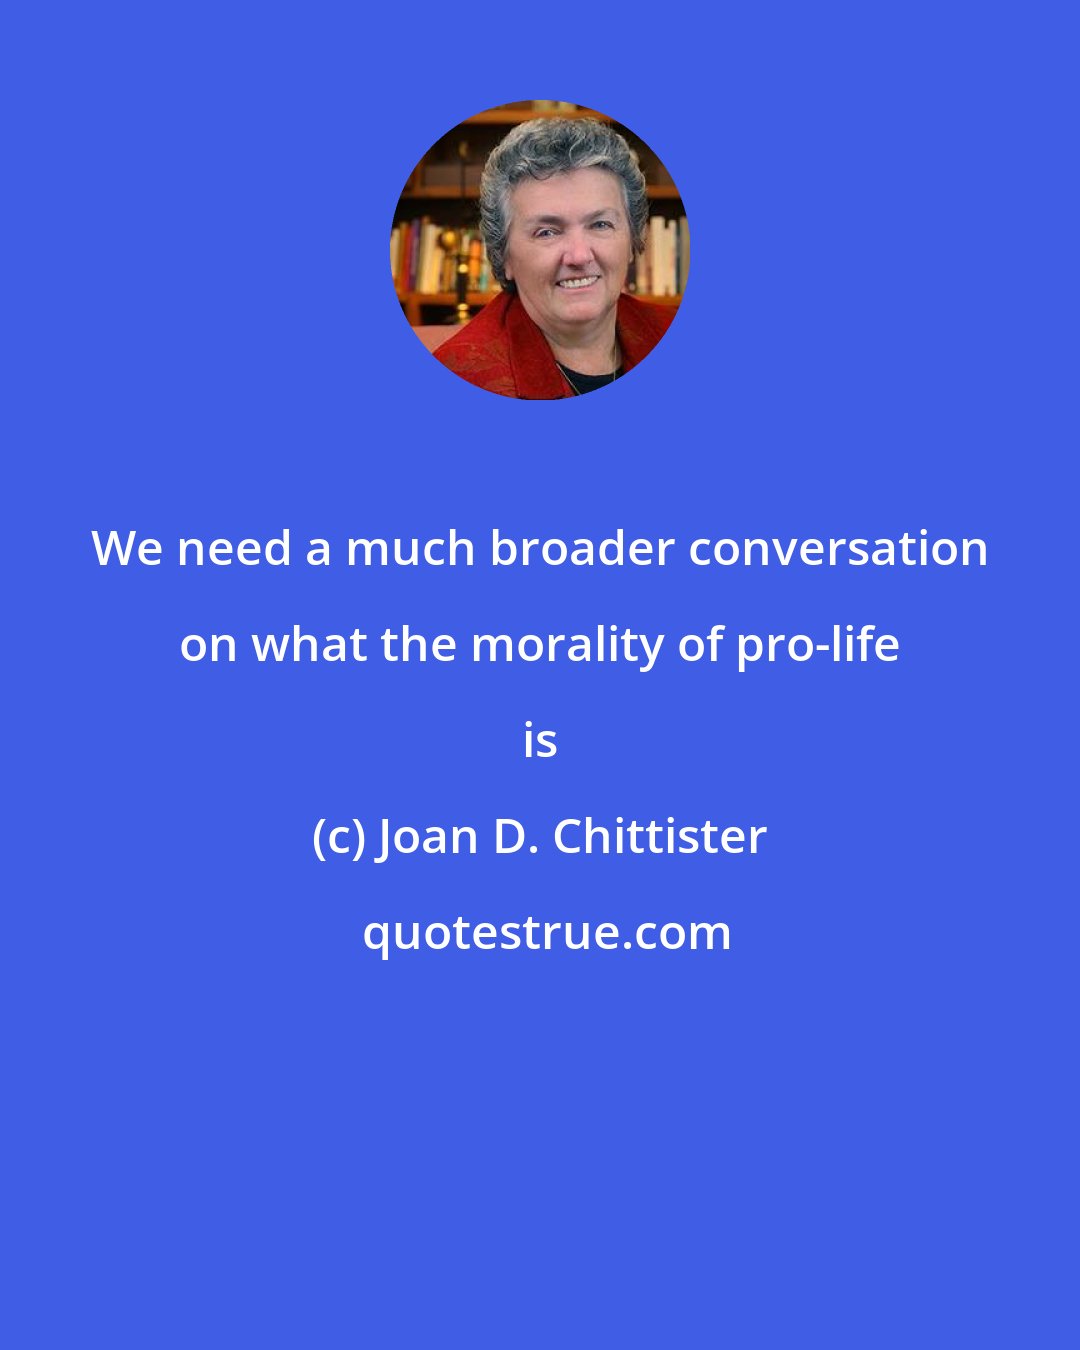 Joan D. Chittister: We need a much broader conversation on what the morality of pro-life is